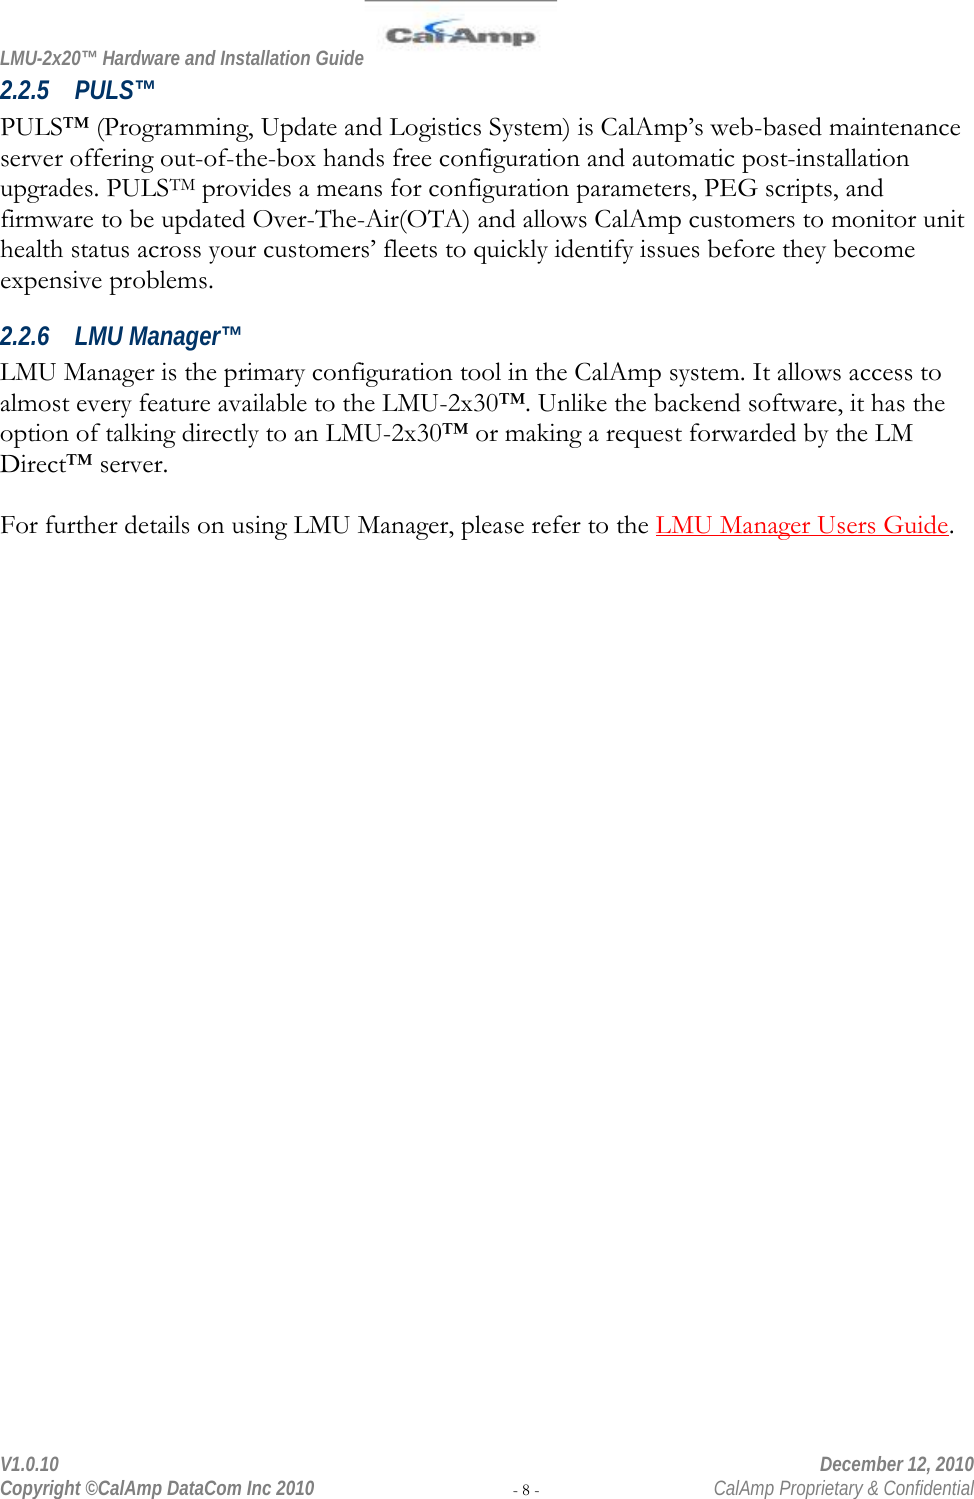 LMU-2x20™ Hardware and Installation Guide  V1.0.10    December 12, 2010 Copyright ©CalAmp DataCom Inc 2010 - 8 -  CalAmp Proprietary &amp; Confidential 2.2.5 PULS™ PULS™ (Programming, Update and Logistics System) is CalAmp’s web-based maintenance server offering out-of-the-box hands free configuration and automatic post-installation upgrades. PULSTM provides a means for configuration parameters, PEG scripts, and firmware to be updated Over-The-Air(OTA) and allows CalAmp customers to monitor unit health status across your customers’ fleets to quickly identify issues before they become expensive problems. 2.2.6 LMU Manager™ LMU Manager is the primary configuration tool in the CalAmp system. It allows access to almost every feature available to the LMU-2x30™. Unlike the backend software, it has the option of talking directly to an LMU-2x30™ or making a request forwarded by the LM Direct™ server.  For further details on using LMU Manager, please refer to the LMU Manager Users Guide. 